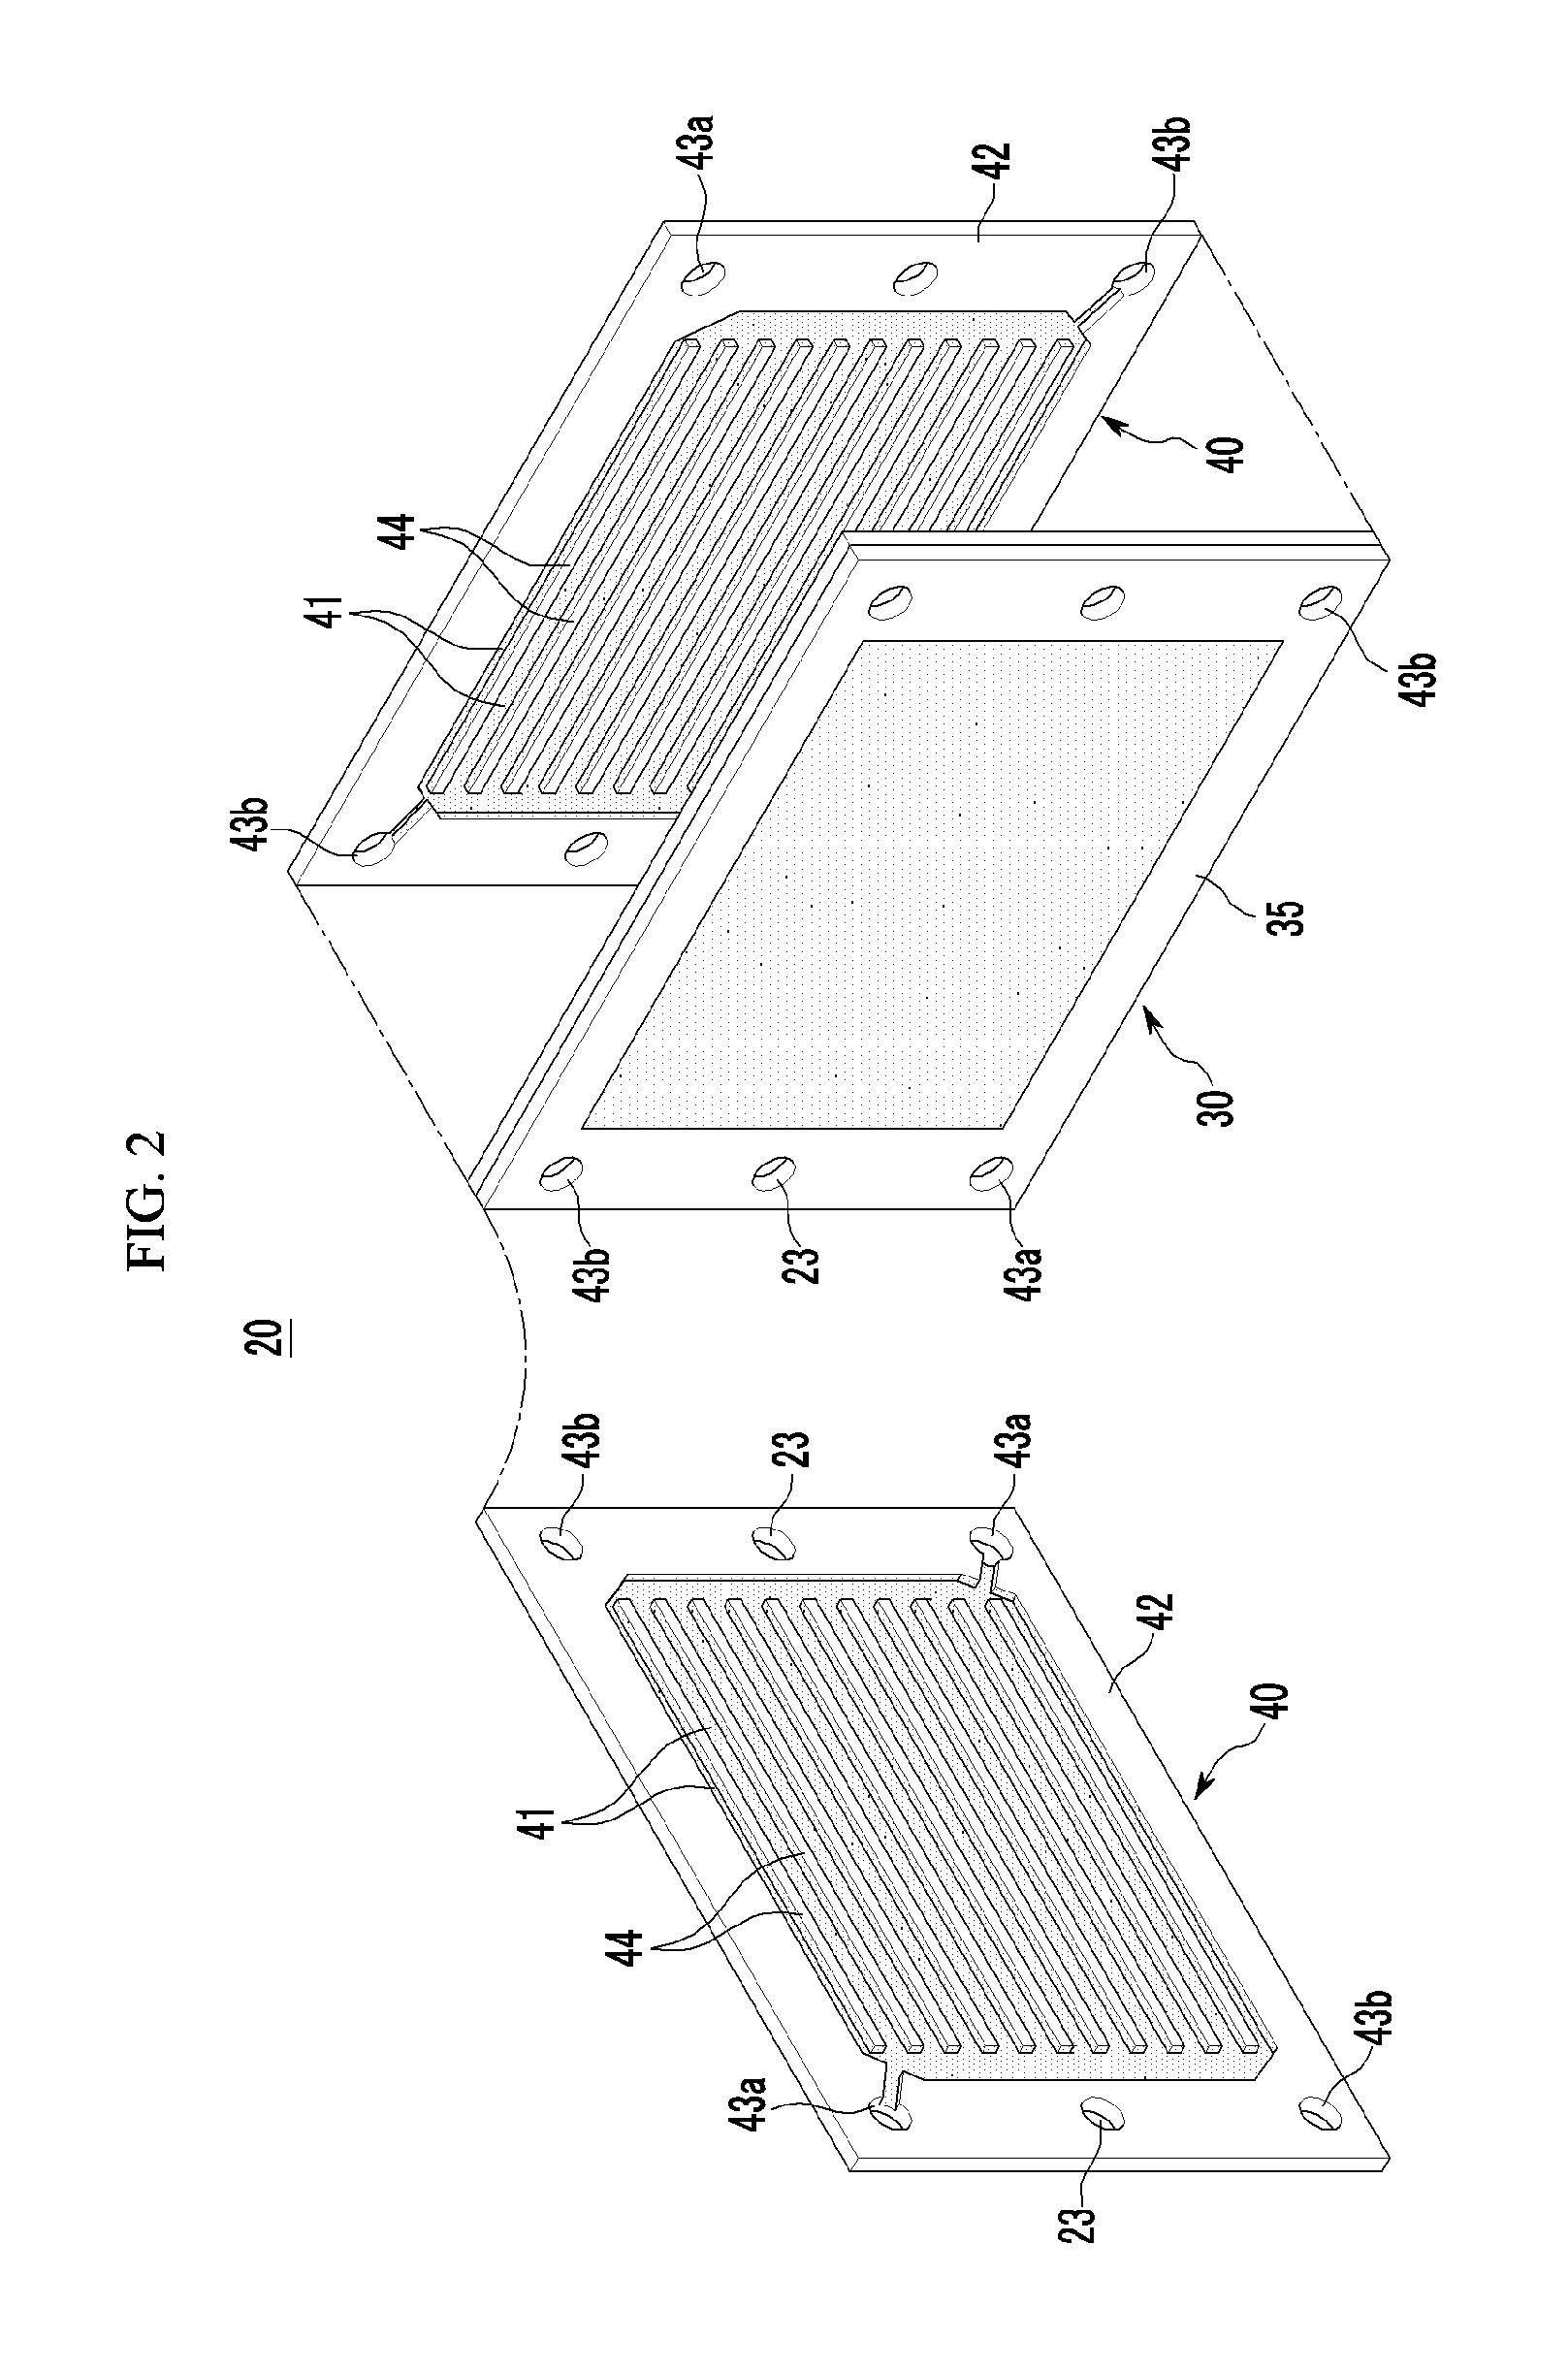 Separator for a fuel cell, a production method therefor and a fuel cell stack comprising the same